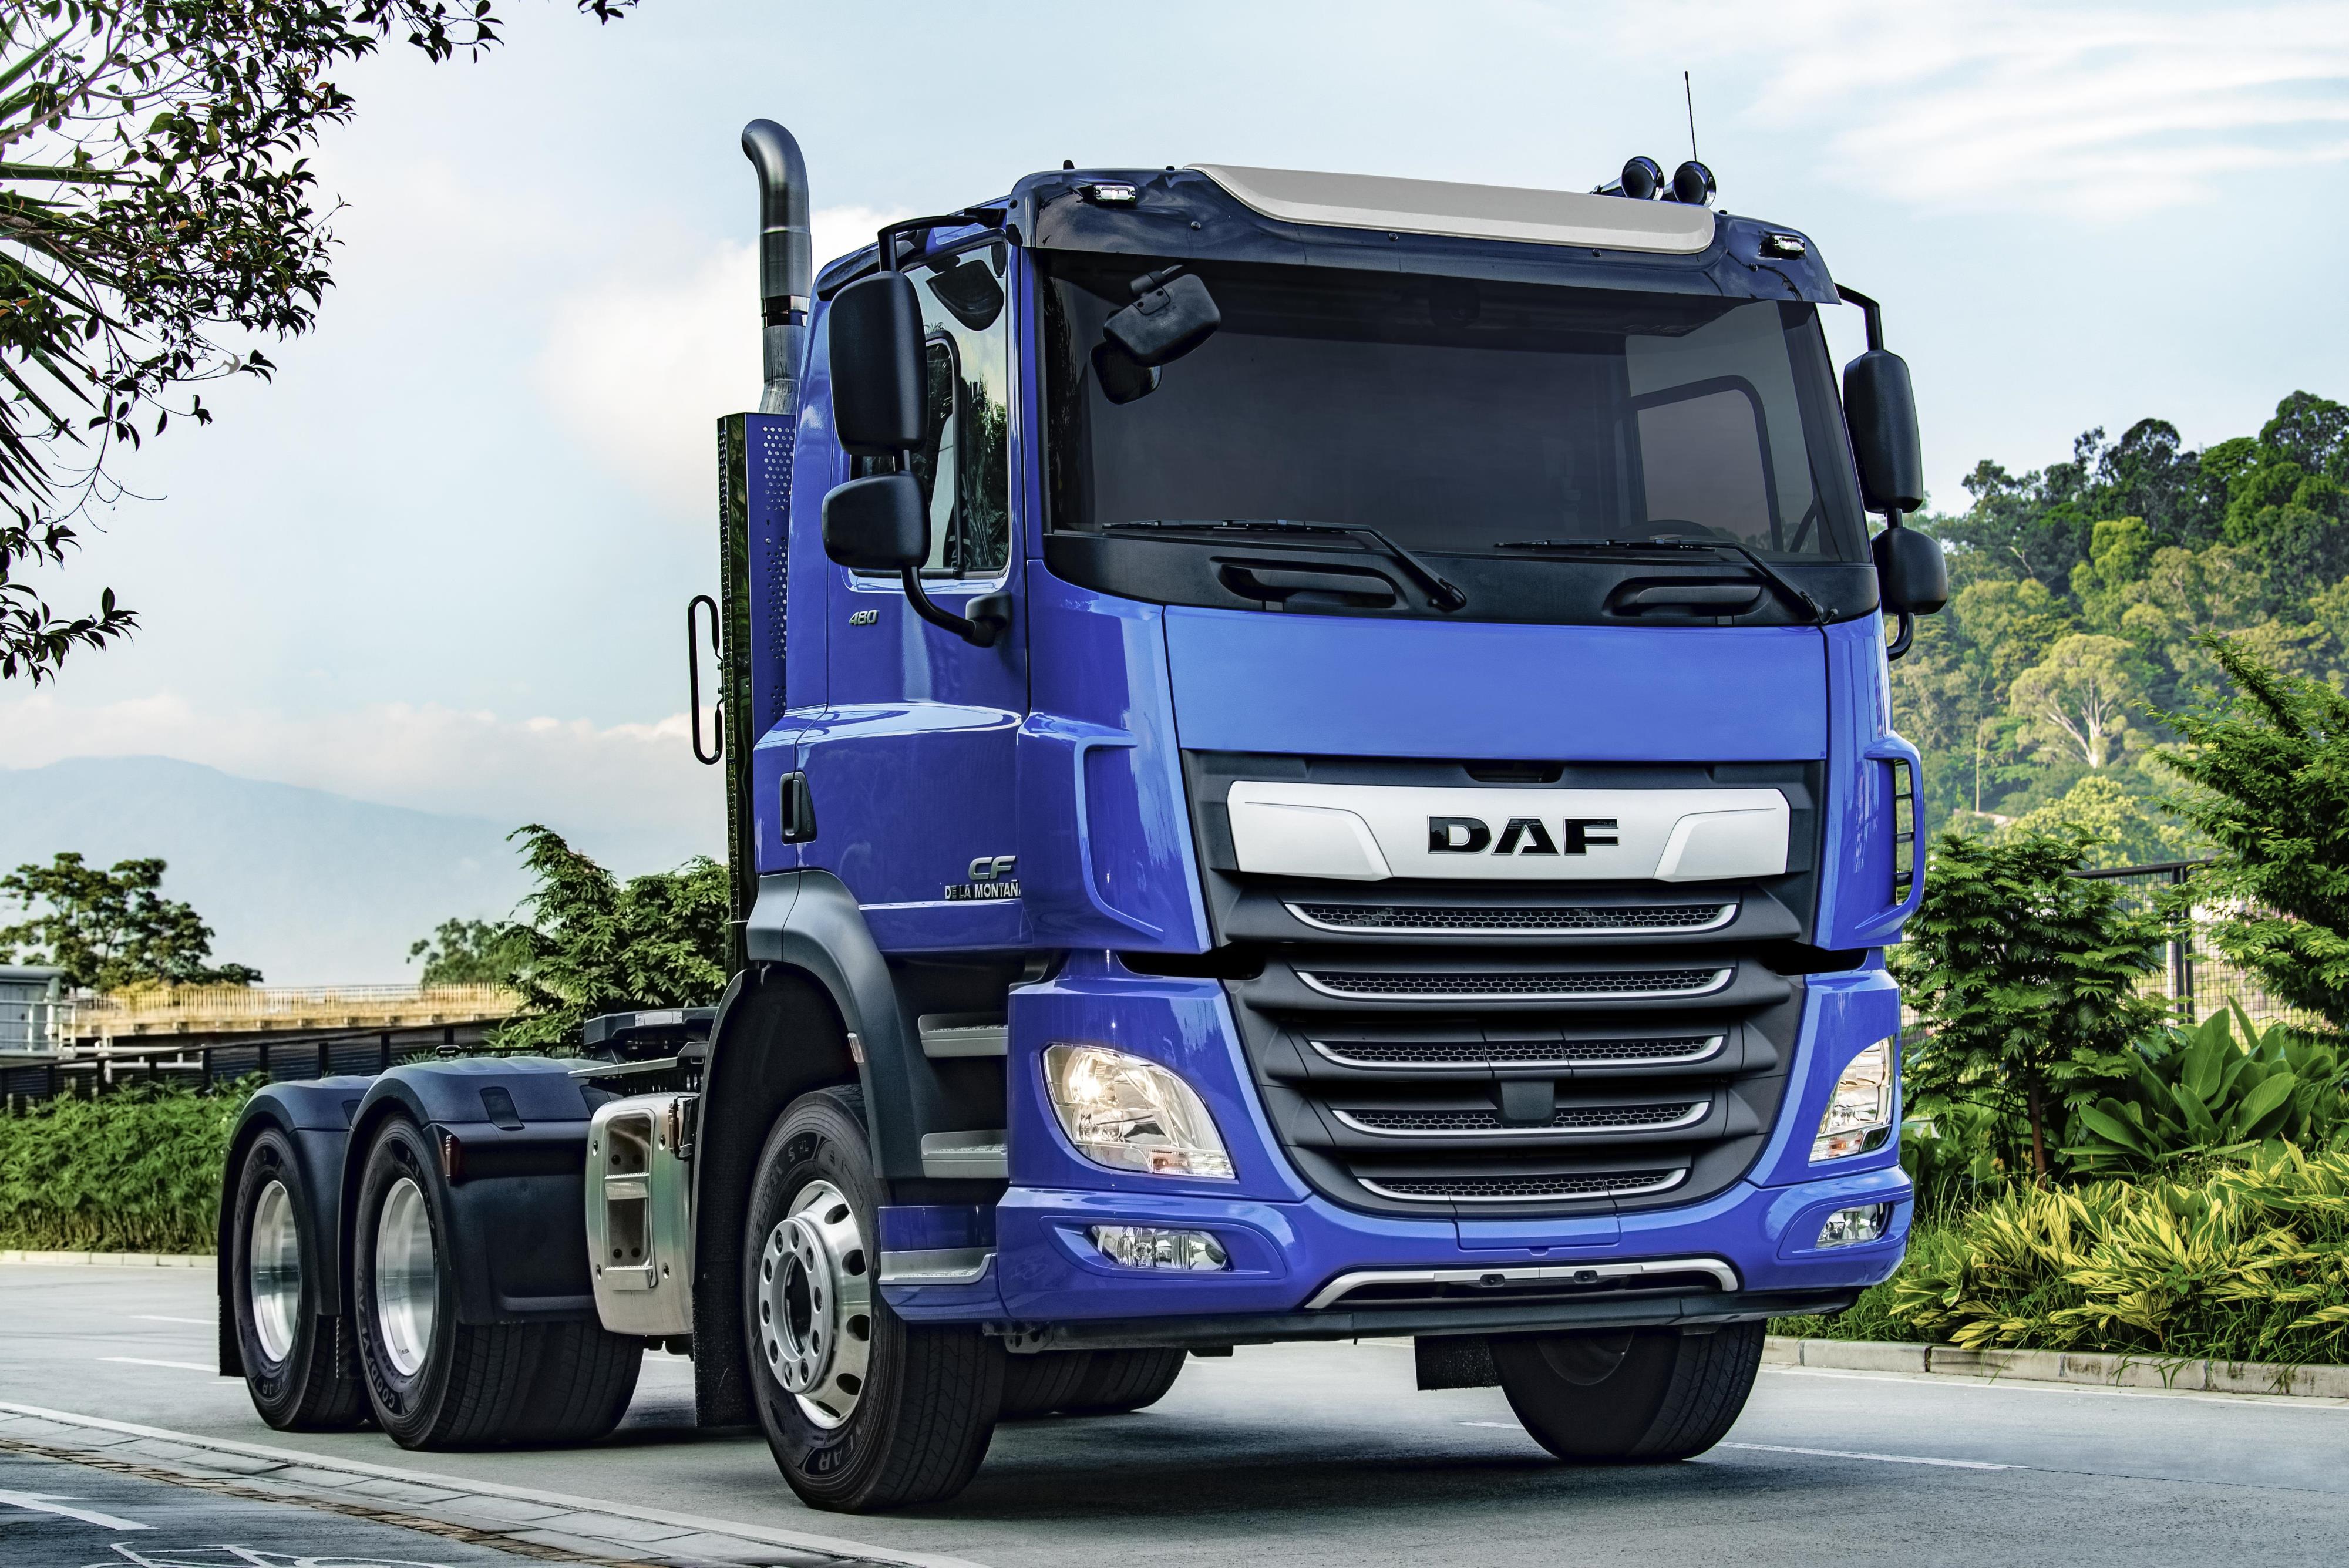 01 DAF to ship 200 heavyduty trucks to Colombia